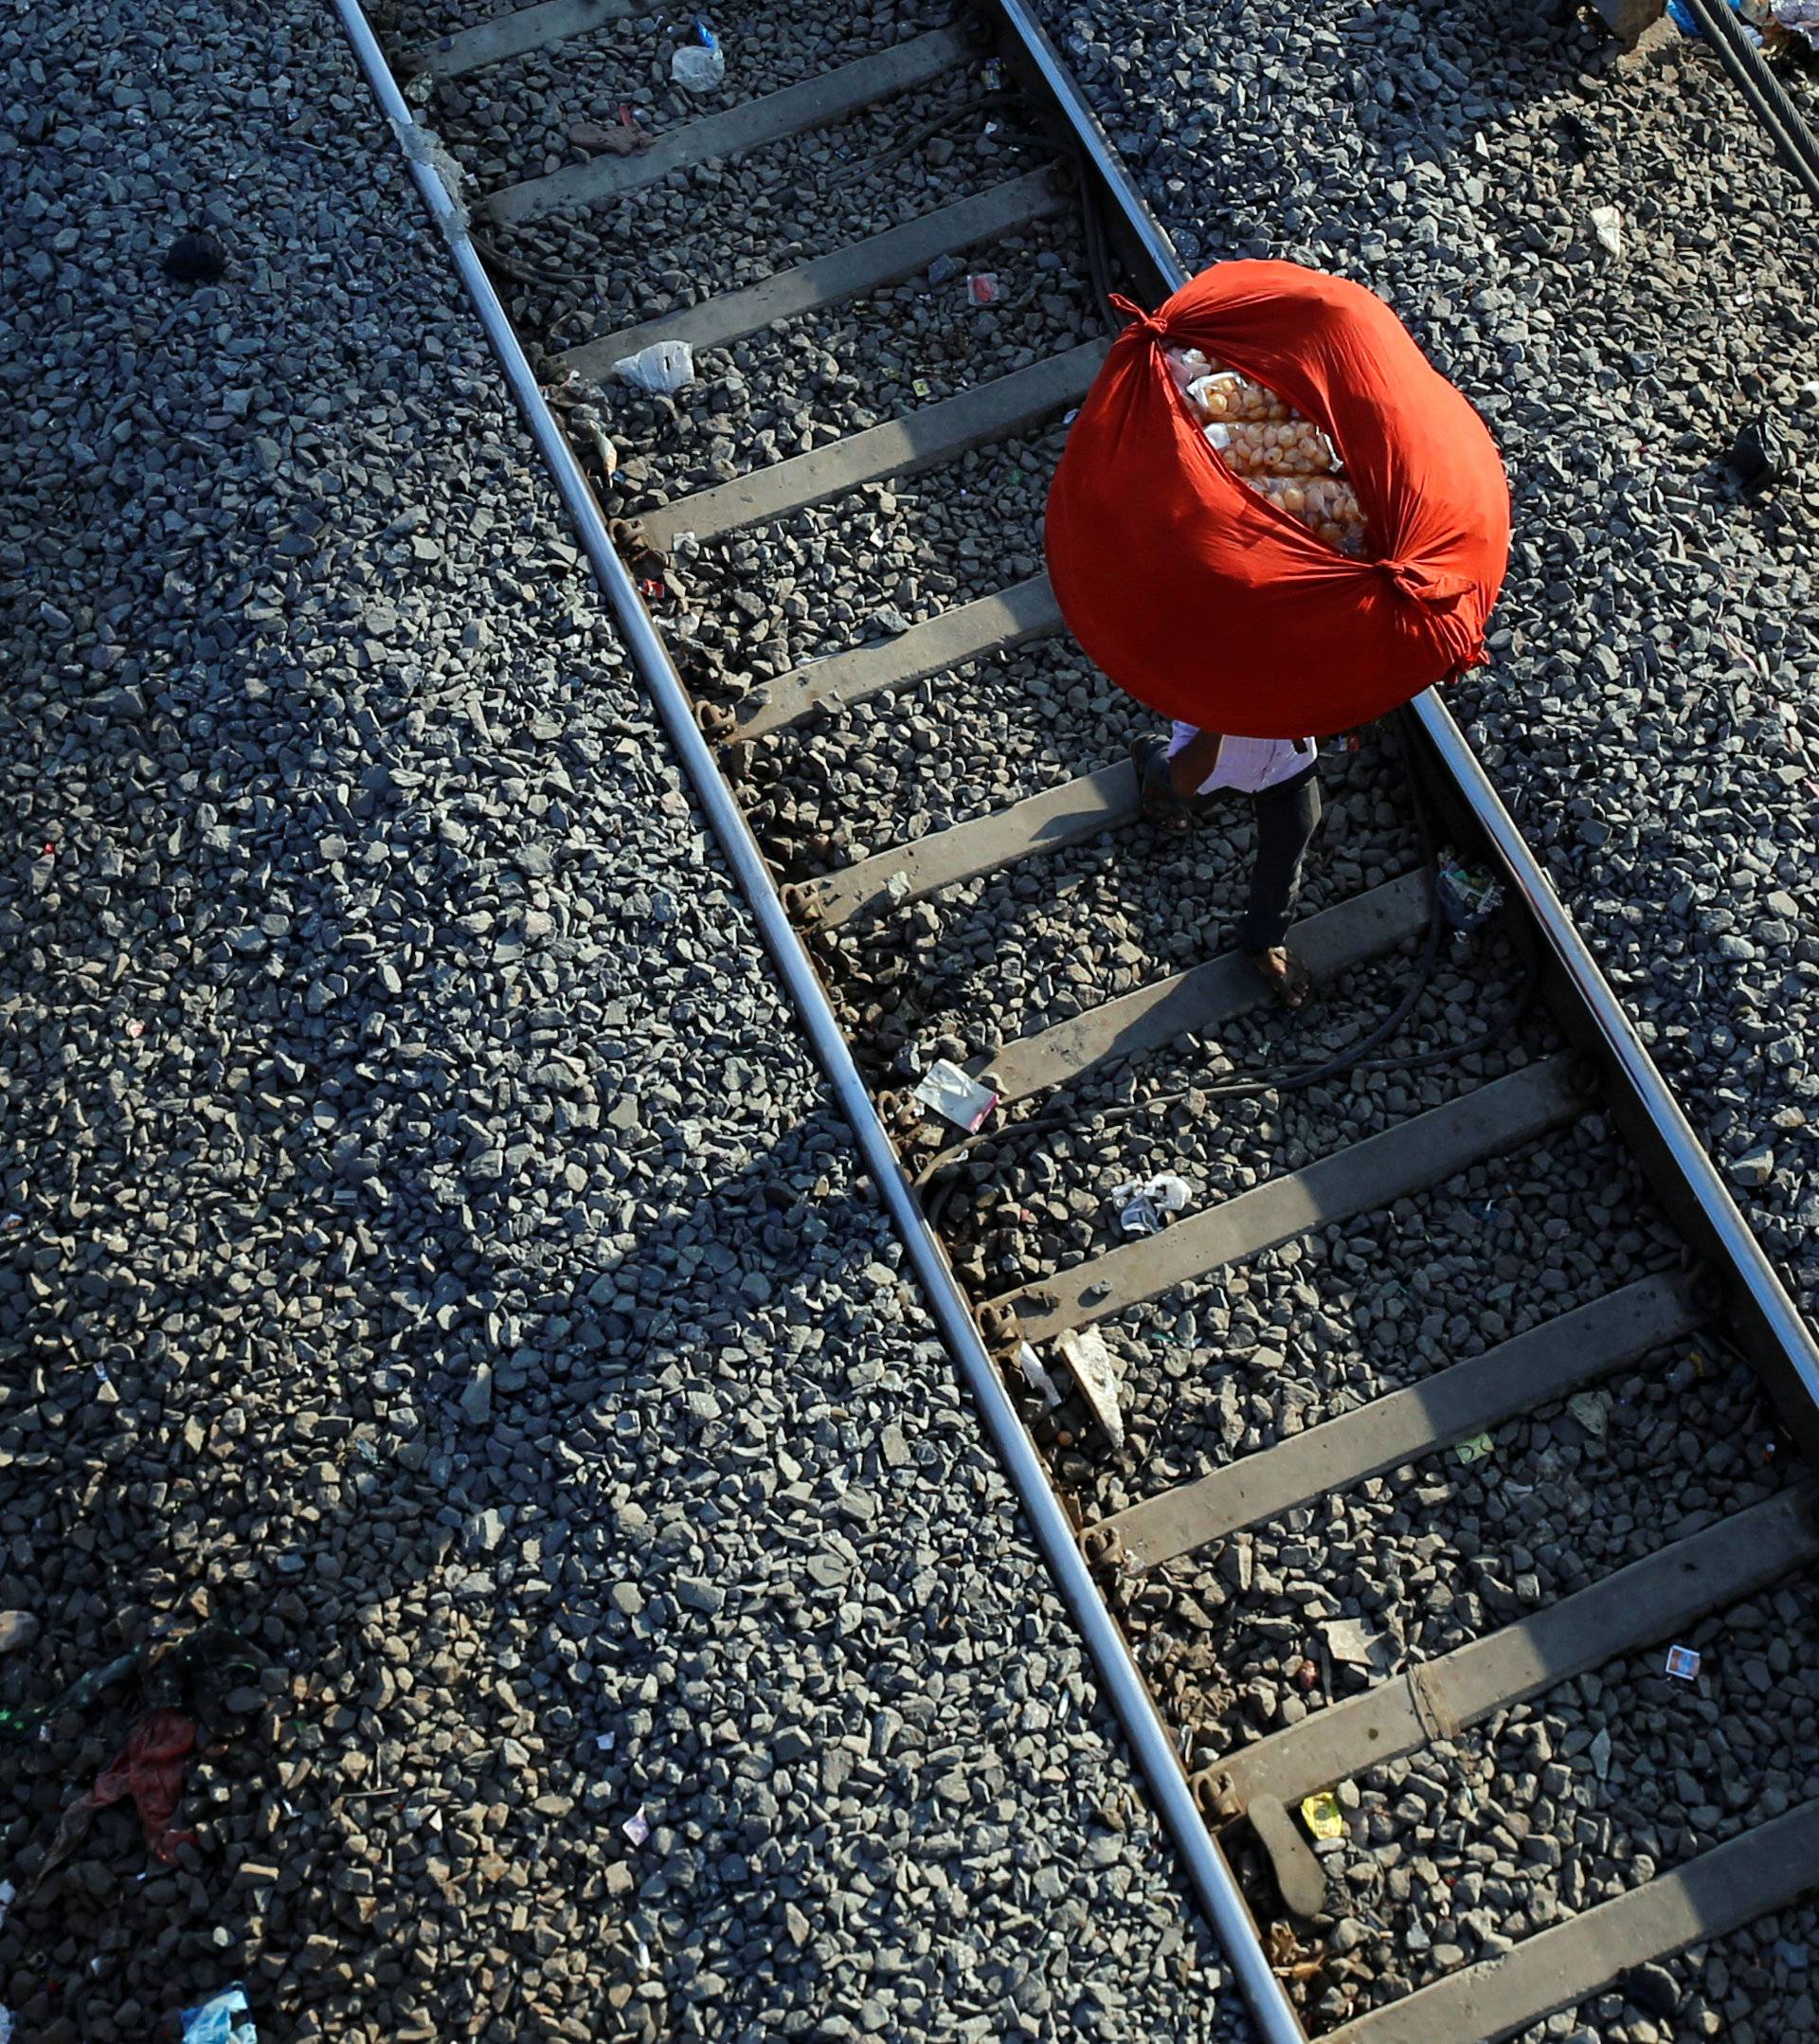 A man carries "paani puri", a traditional Indian snack, on his head on a railway track in Mumbai